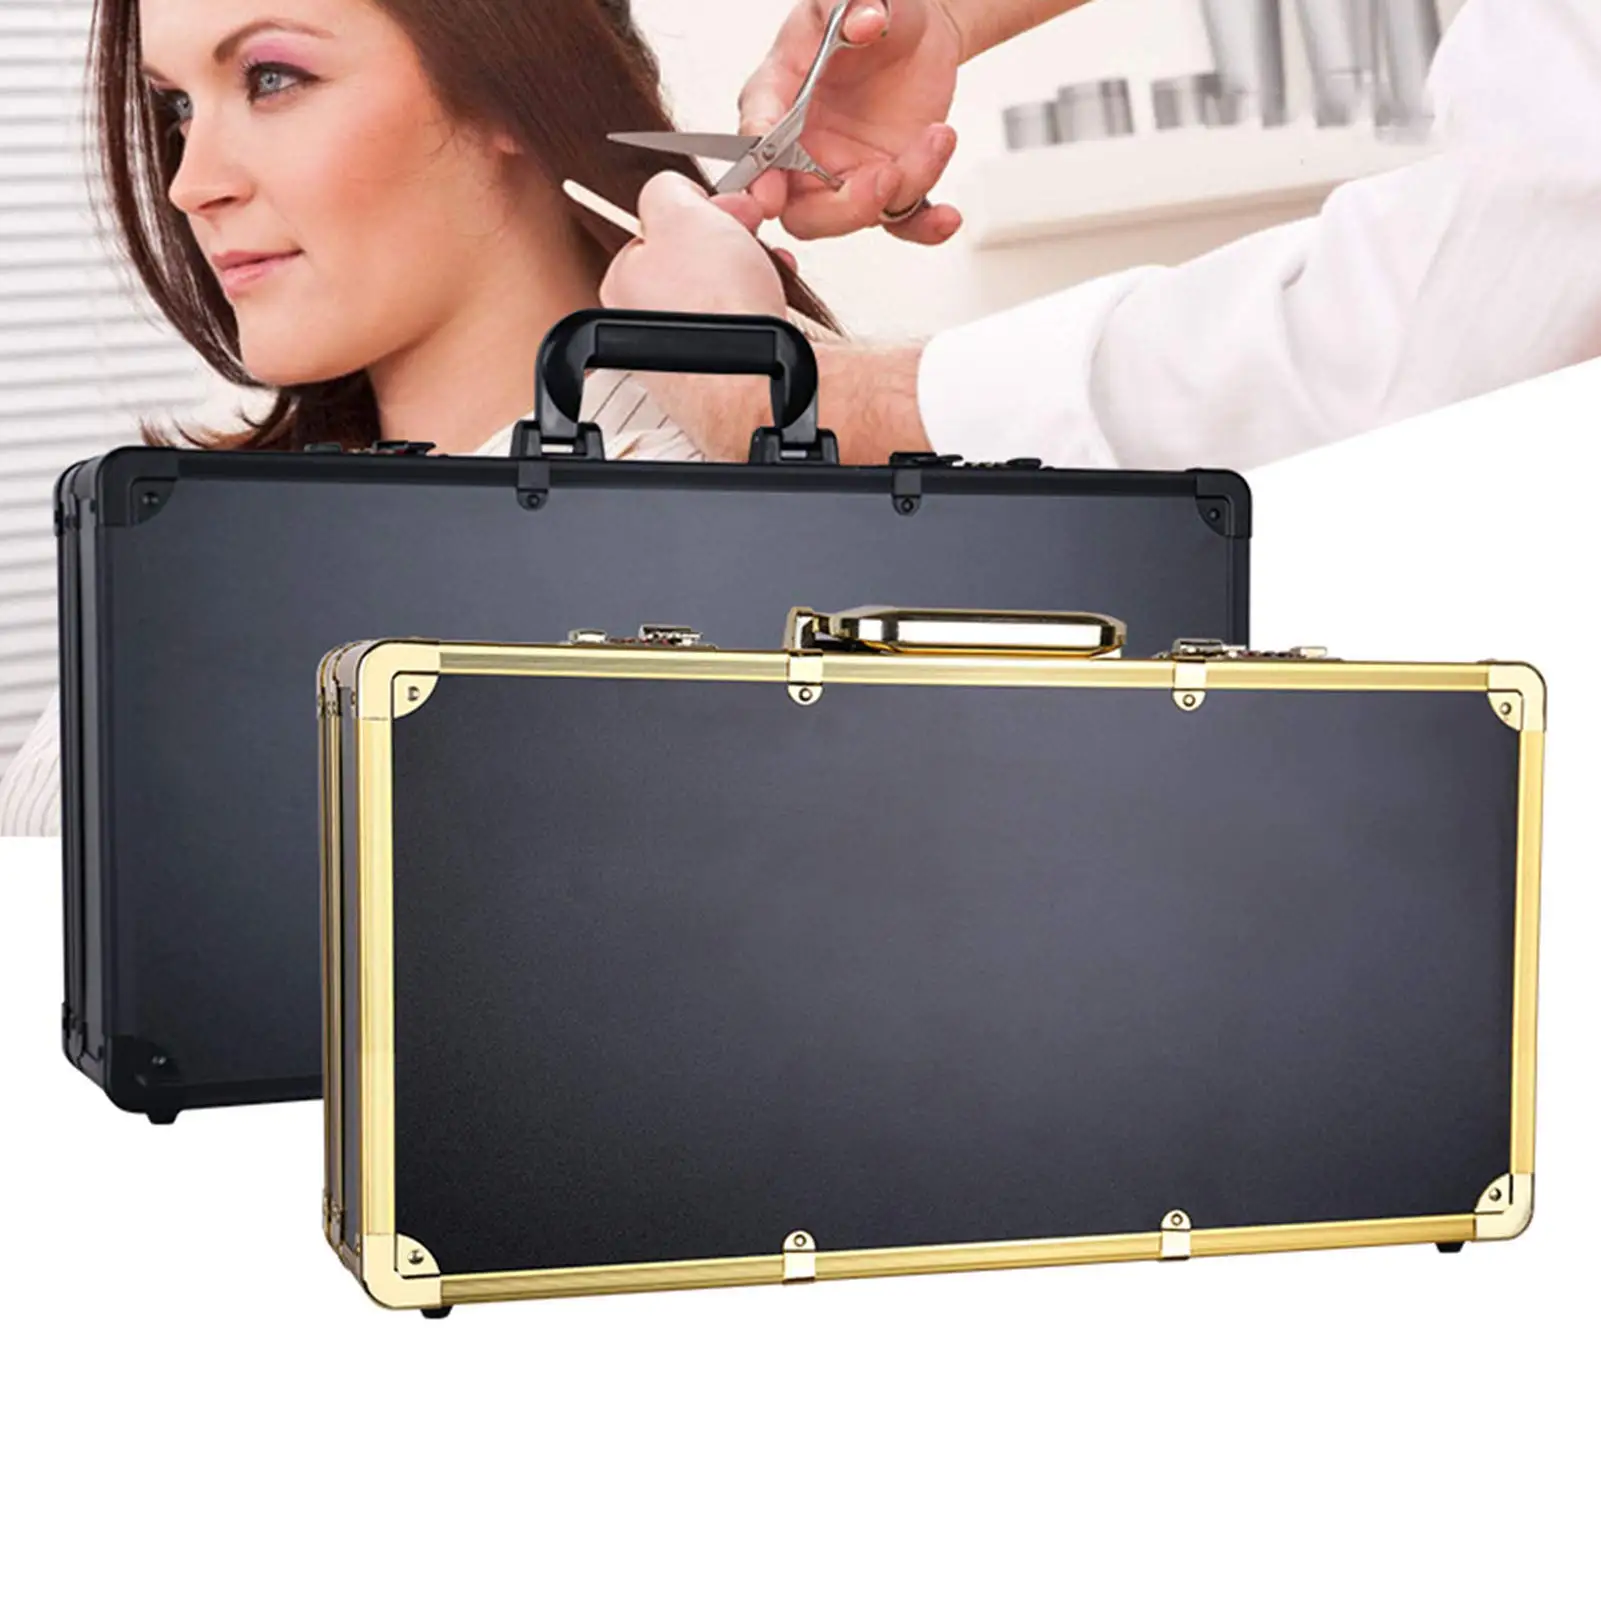 Professional Barber Aluminum Case Hairdressing Toolbox Large Capacity Travel Suitcase With Combination Lock Cosmetic Box 2x love heart lock for bags suitcase mini metal padlock with key for diy making purse